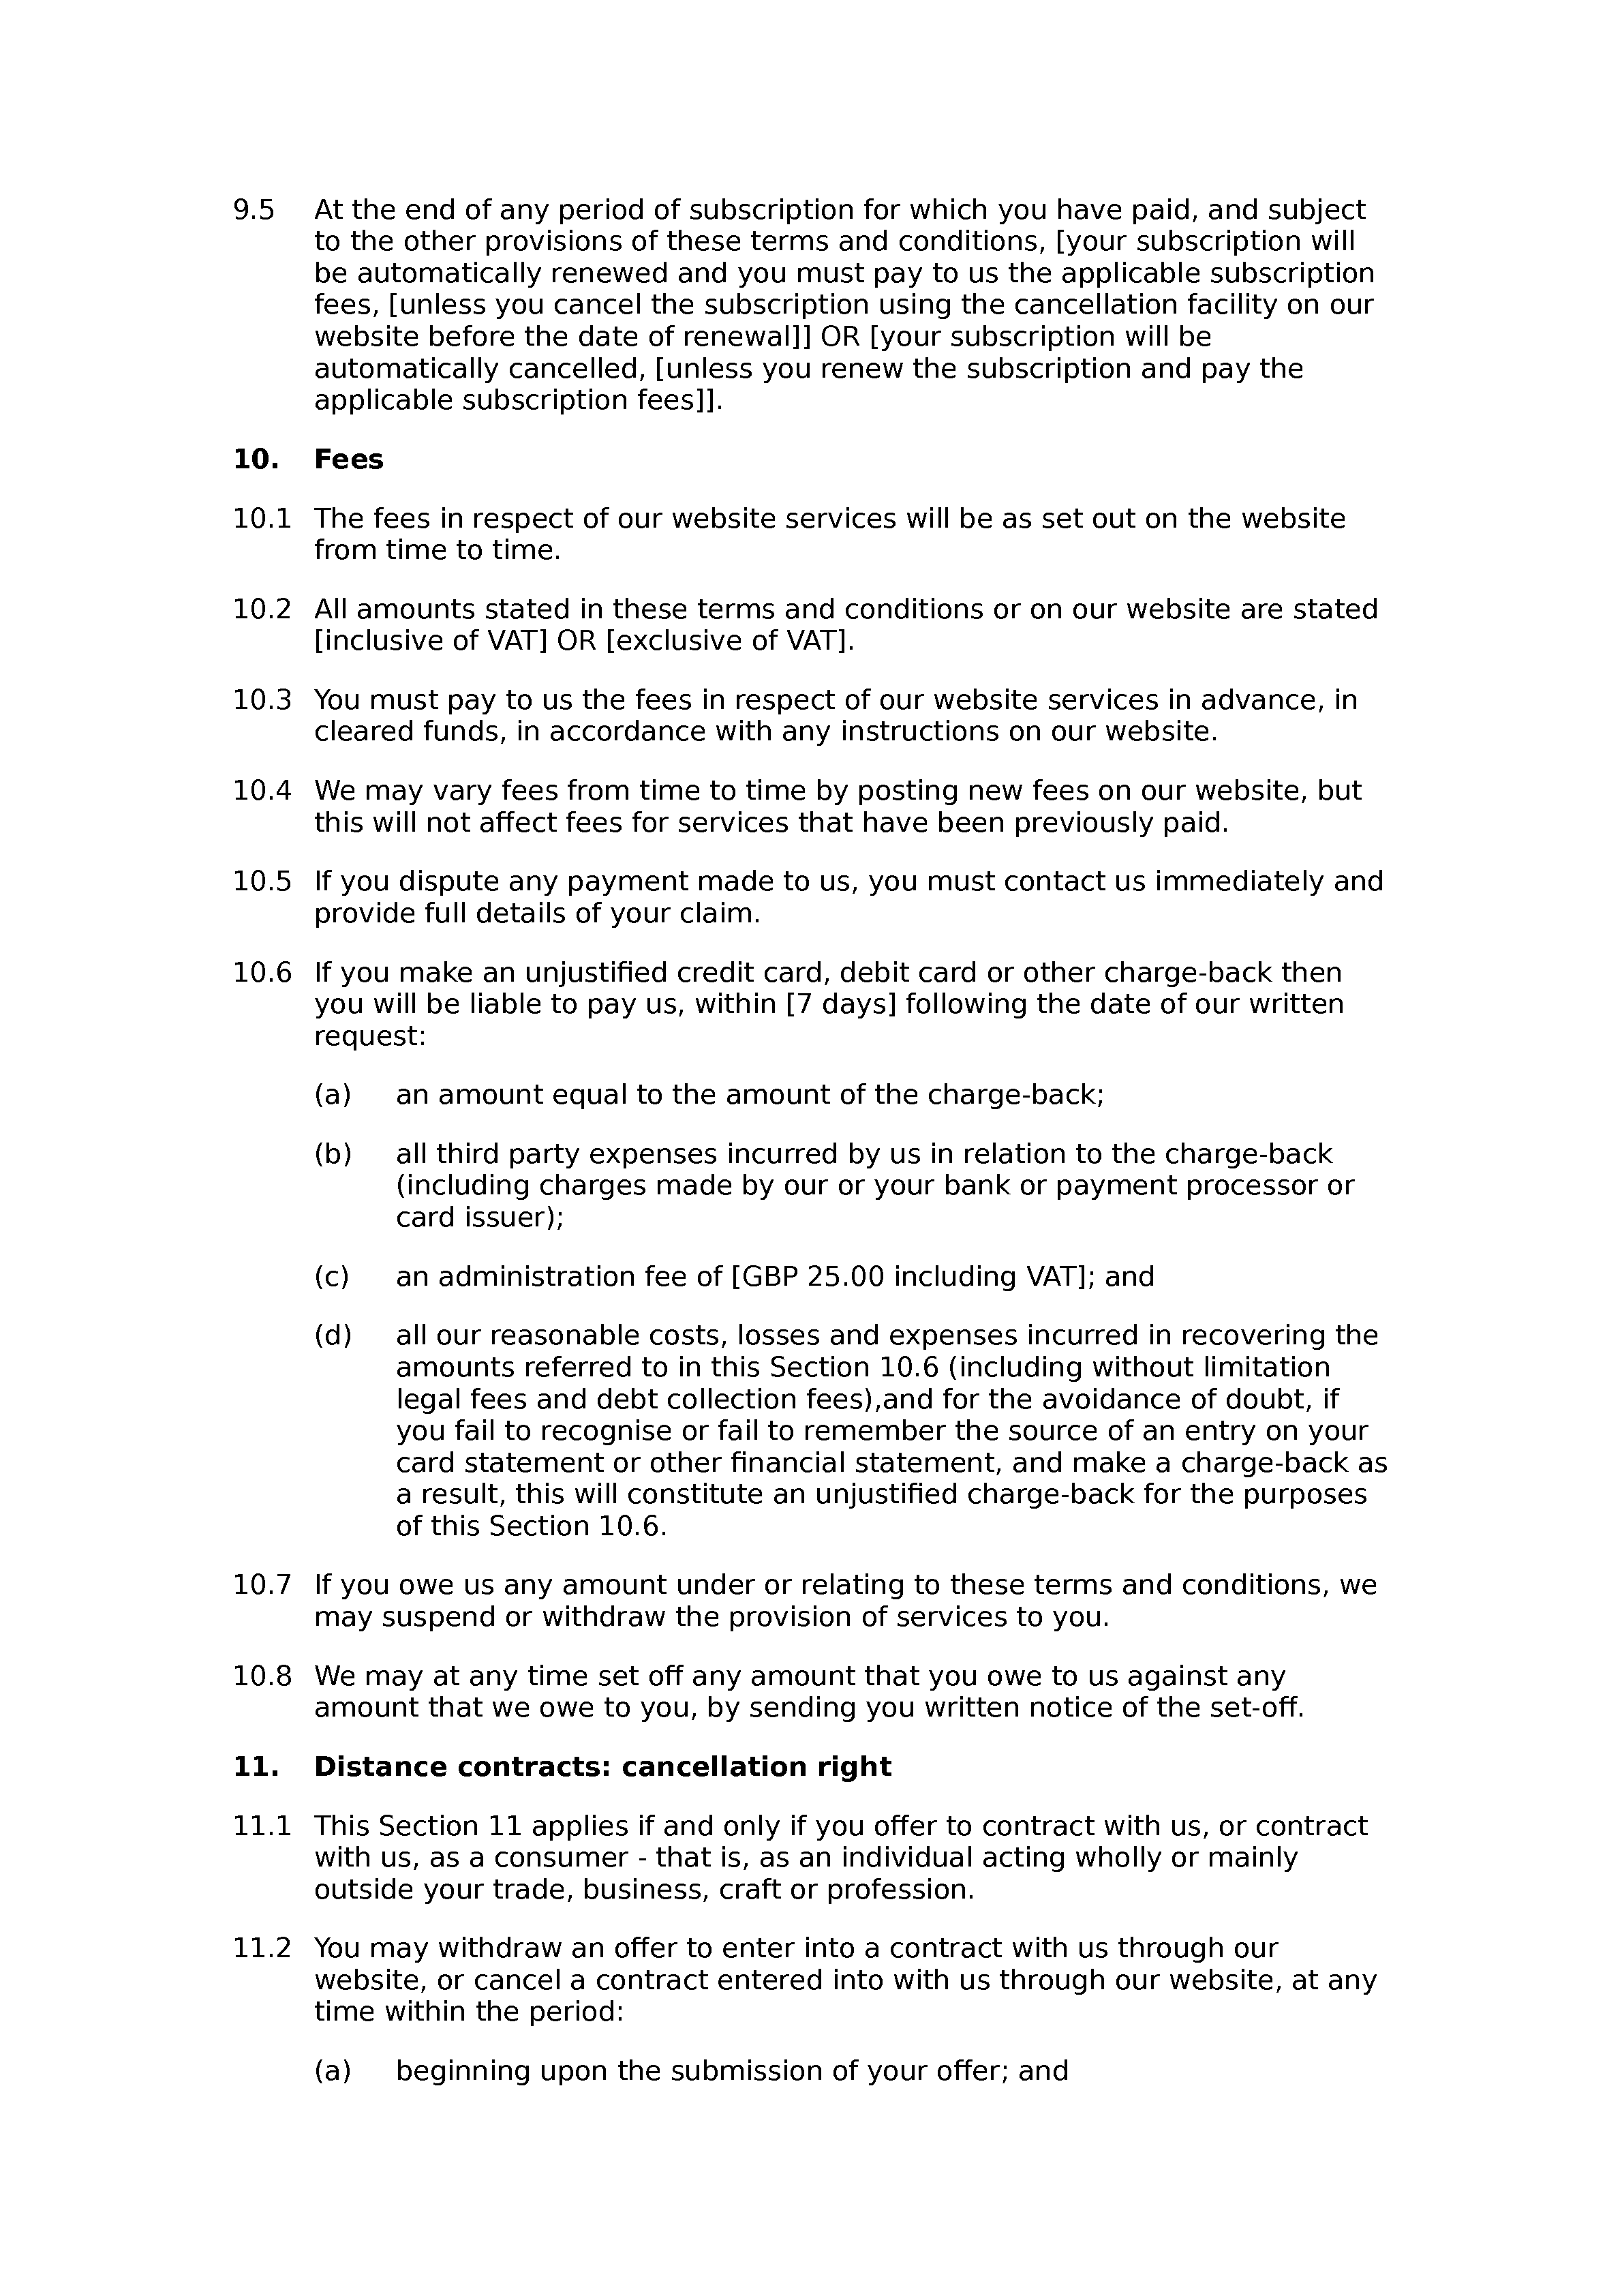 Training course website terms and conditions document preview